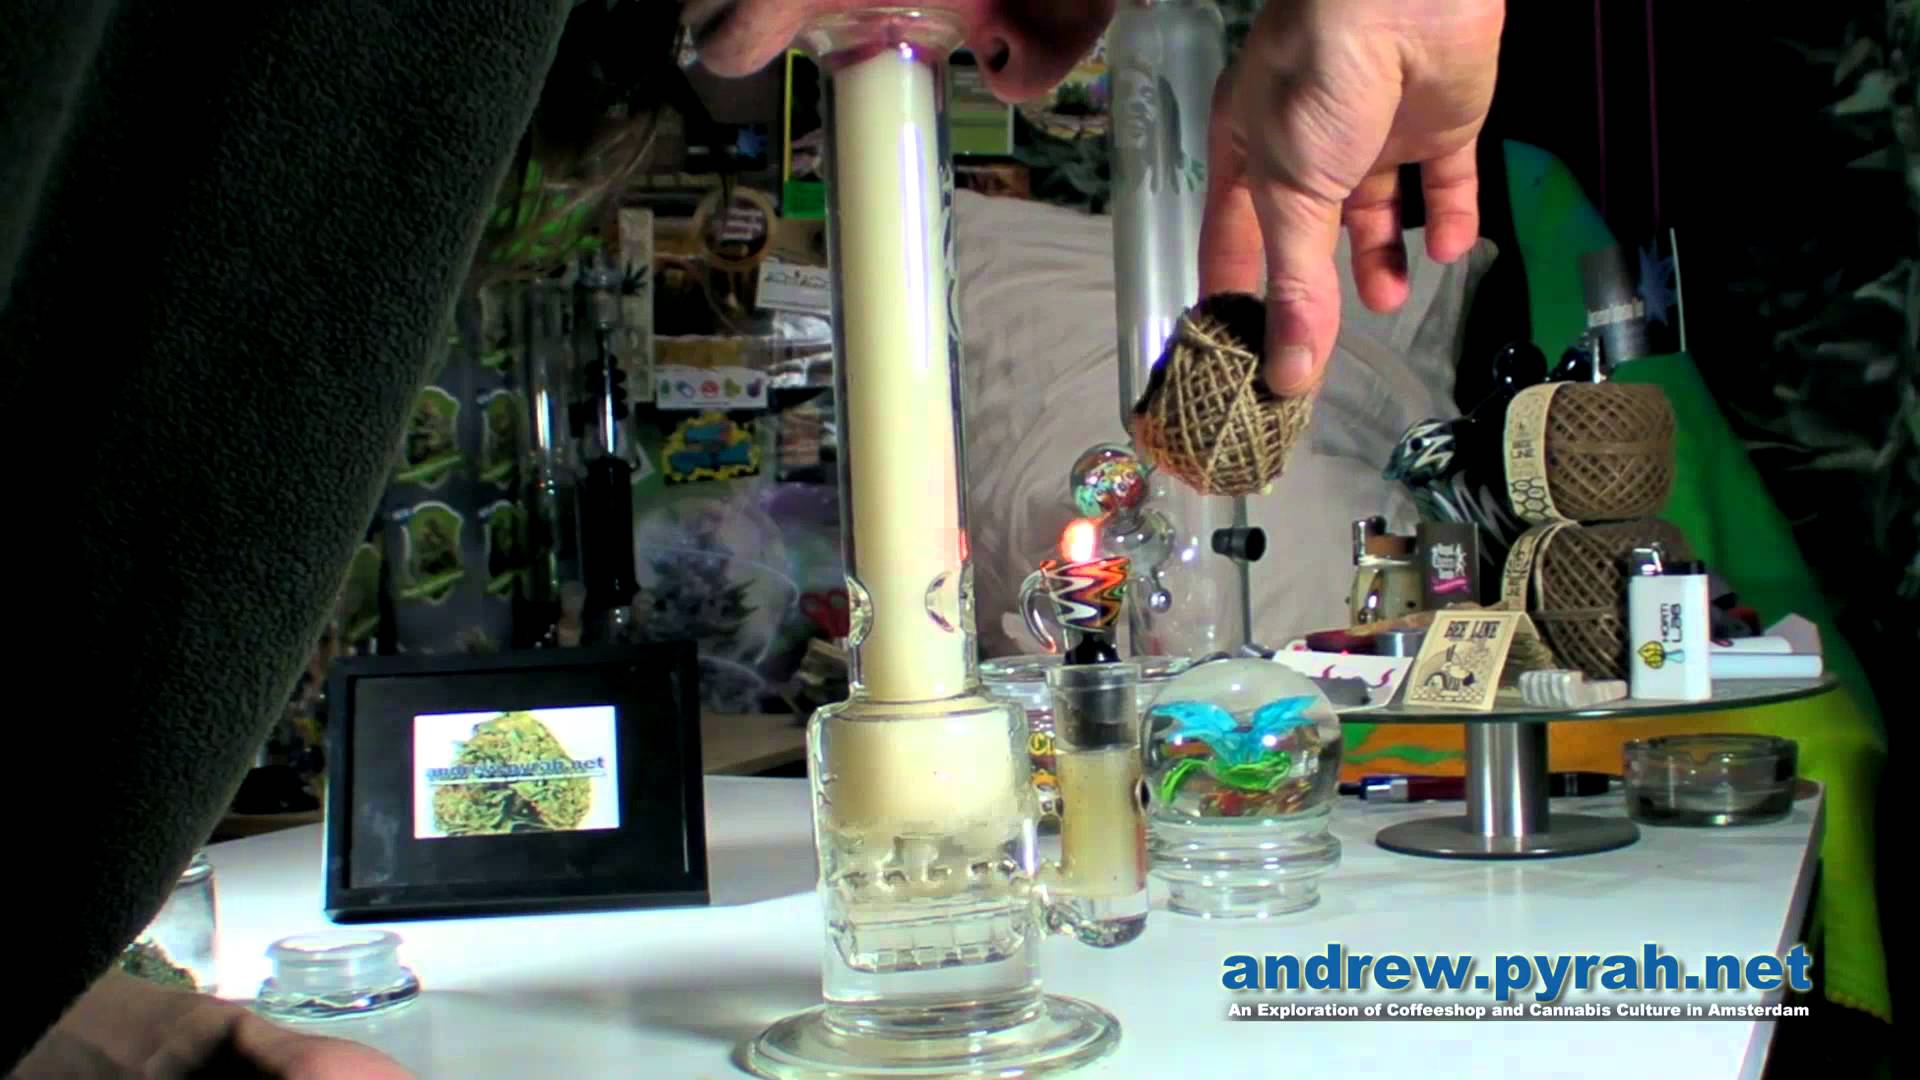 Smoking Cannabis Cup Winning Rollex OG Kush in the Weed Star Afterburner Bong